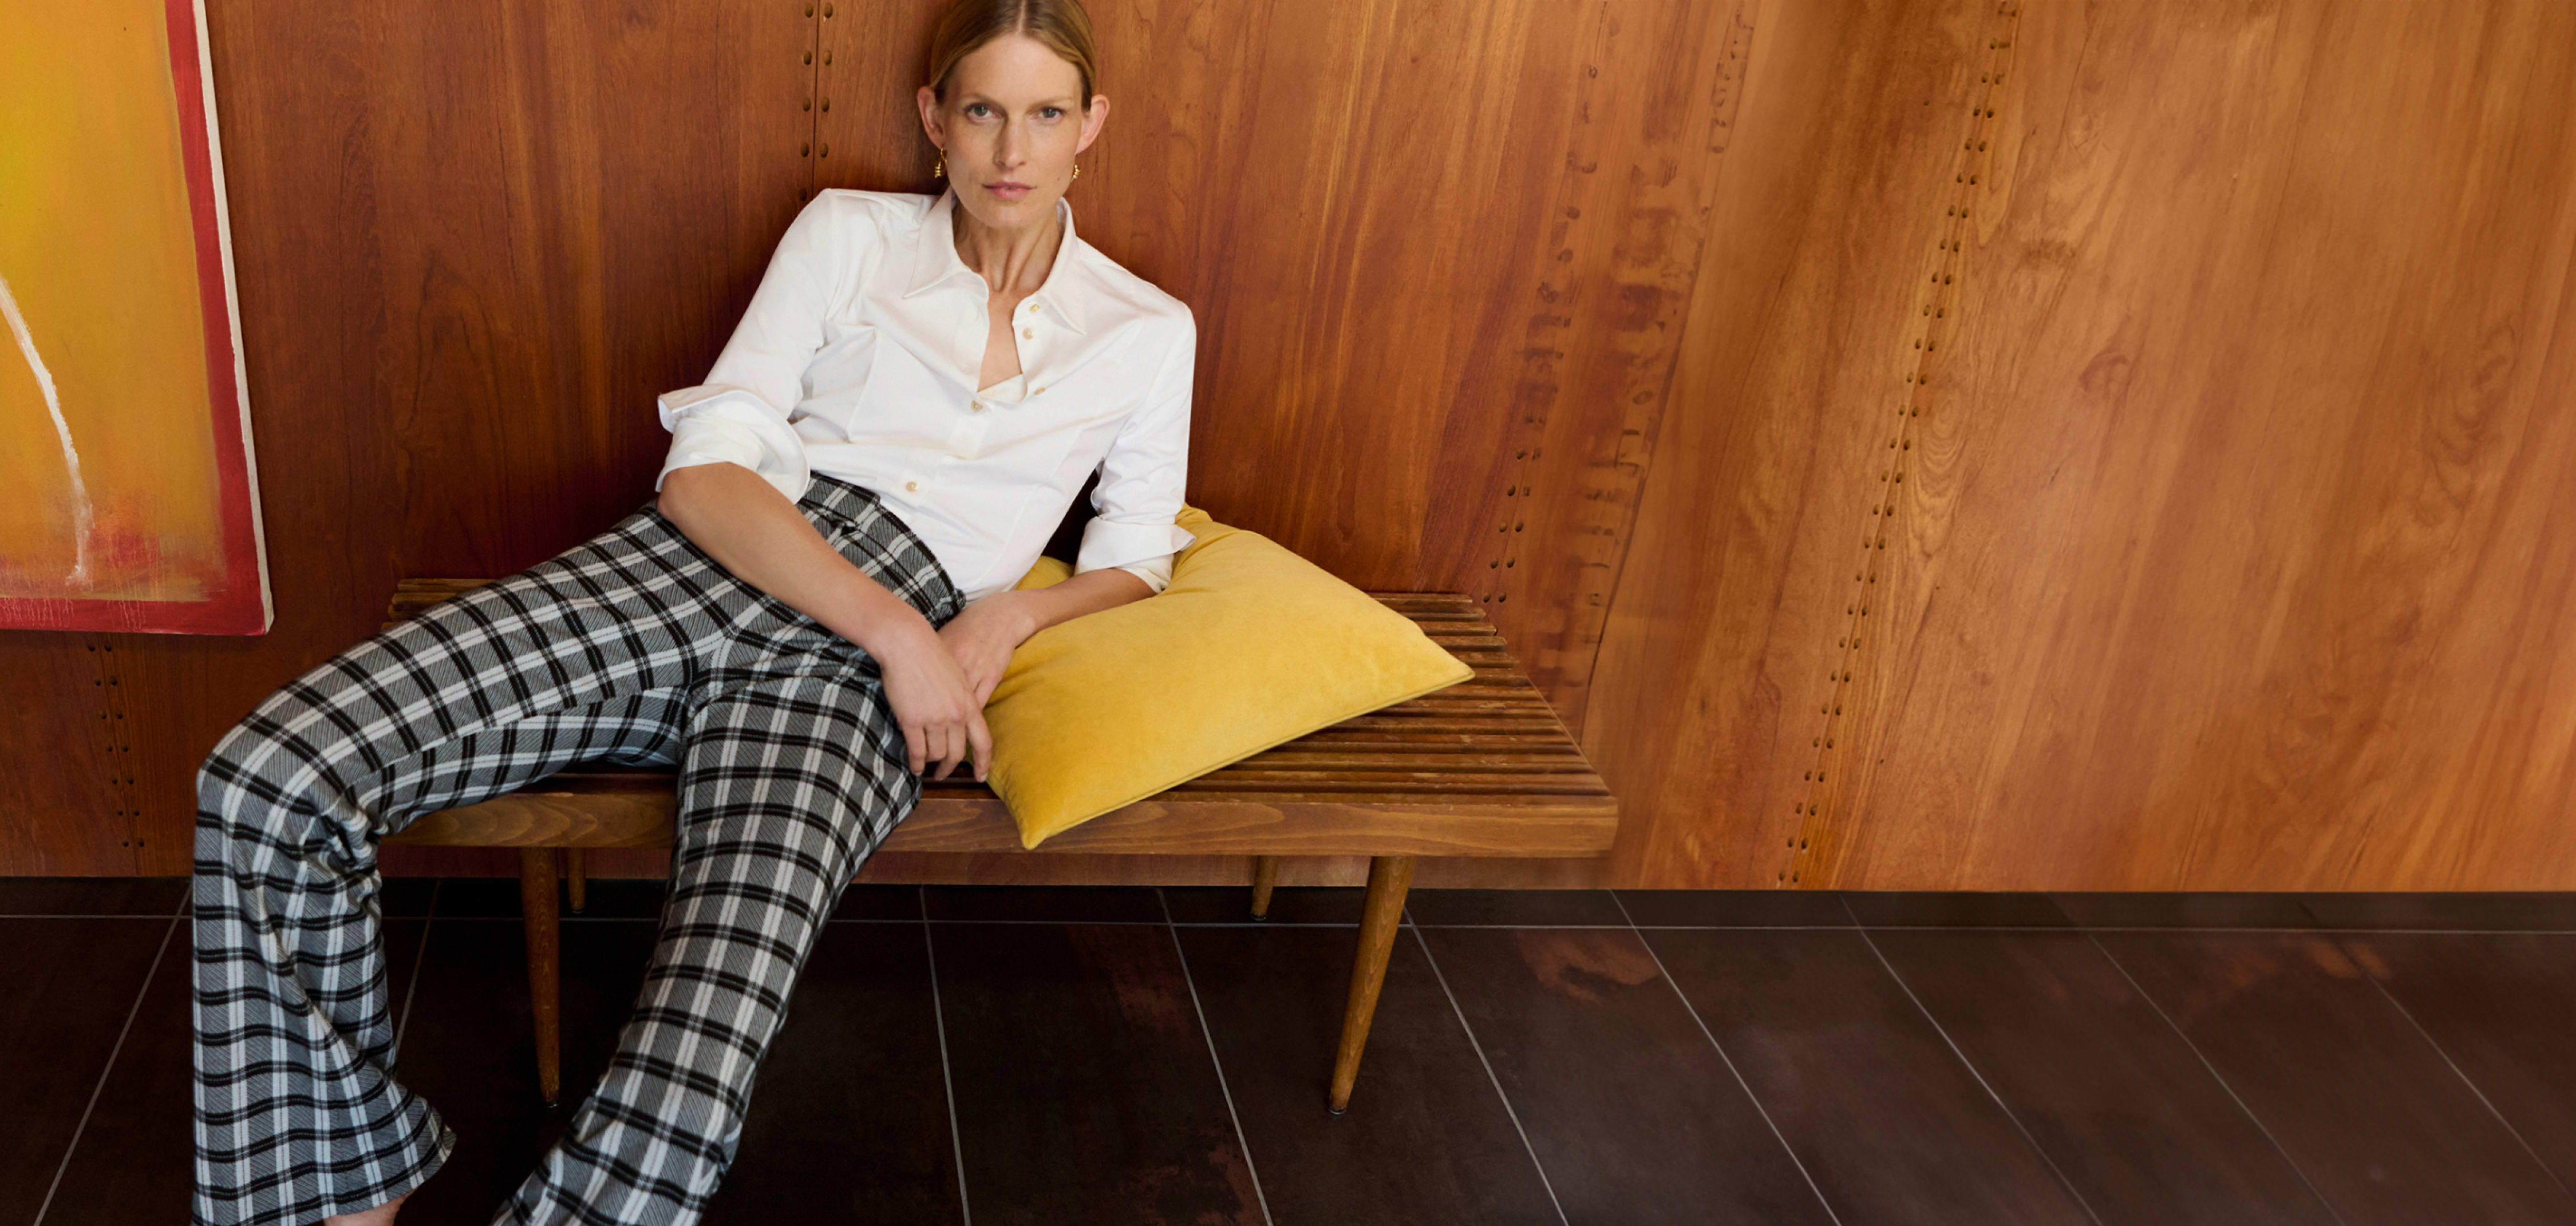 woman lounging on bench with yellow pillow, wearing white button-down top and black/white checkered pants